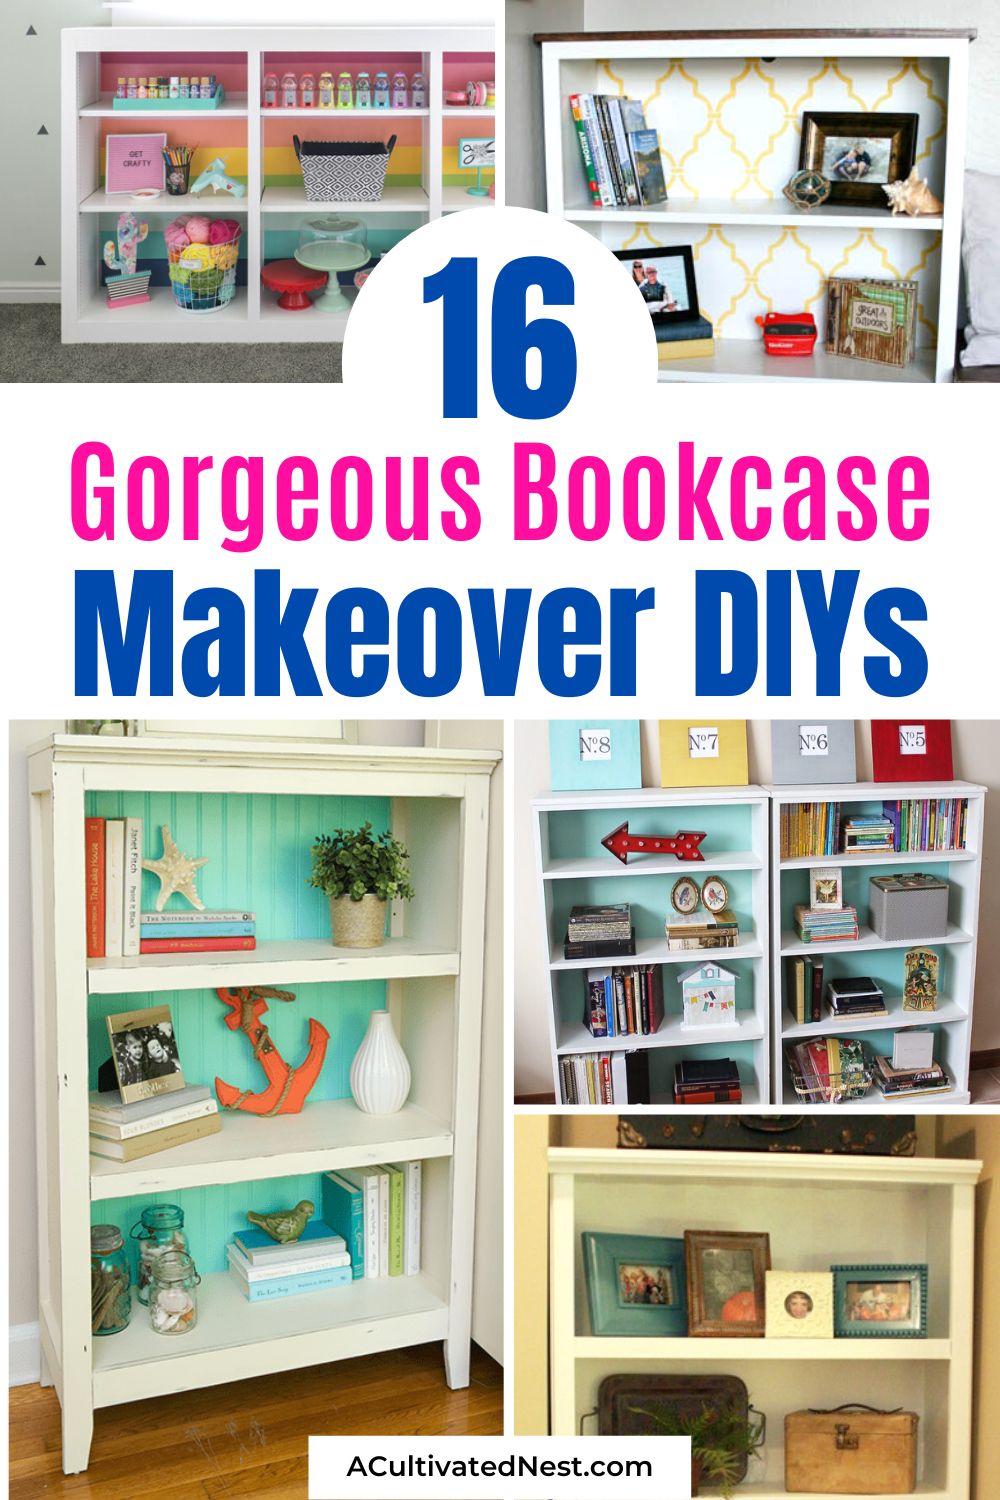 16 Gorgeous DIY Bookcase Makeovers- Transform your old and worn bookcase into a stunning piece of furniture with these amazing DIY bookcase makeovers! These clever ideas will inspire you to get creative with your bookshelves! #DIYbookcases #bookcaseMakeovers #homeDecorIdeas #diys #ACultivatedNest